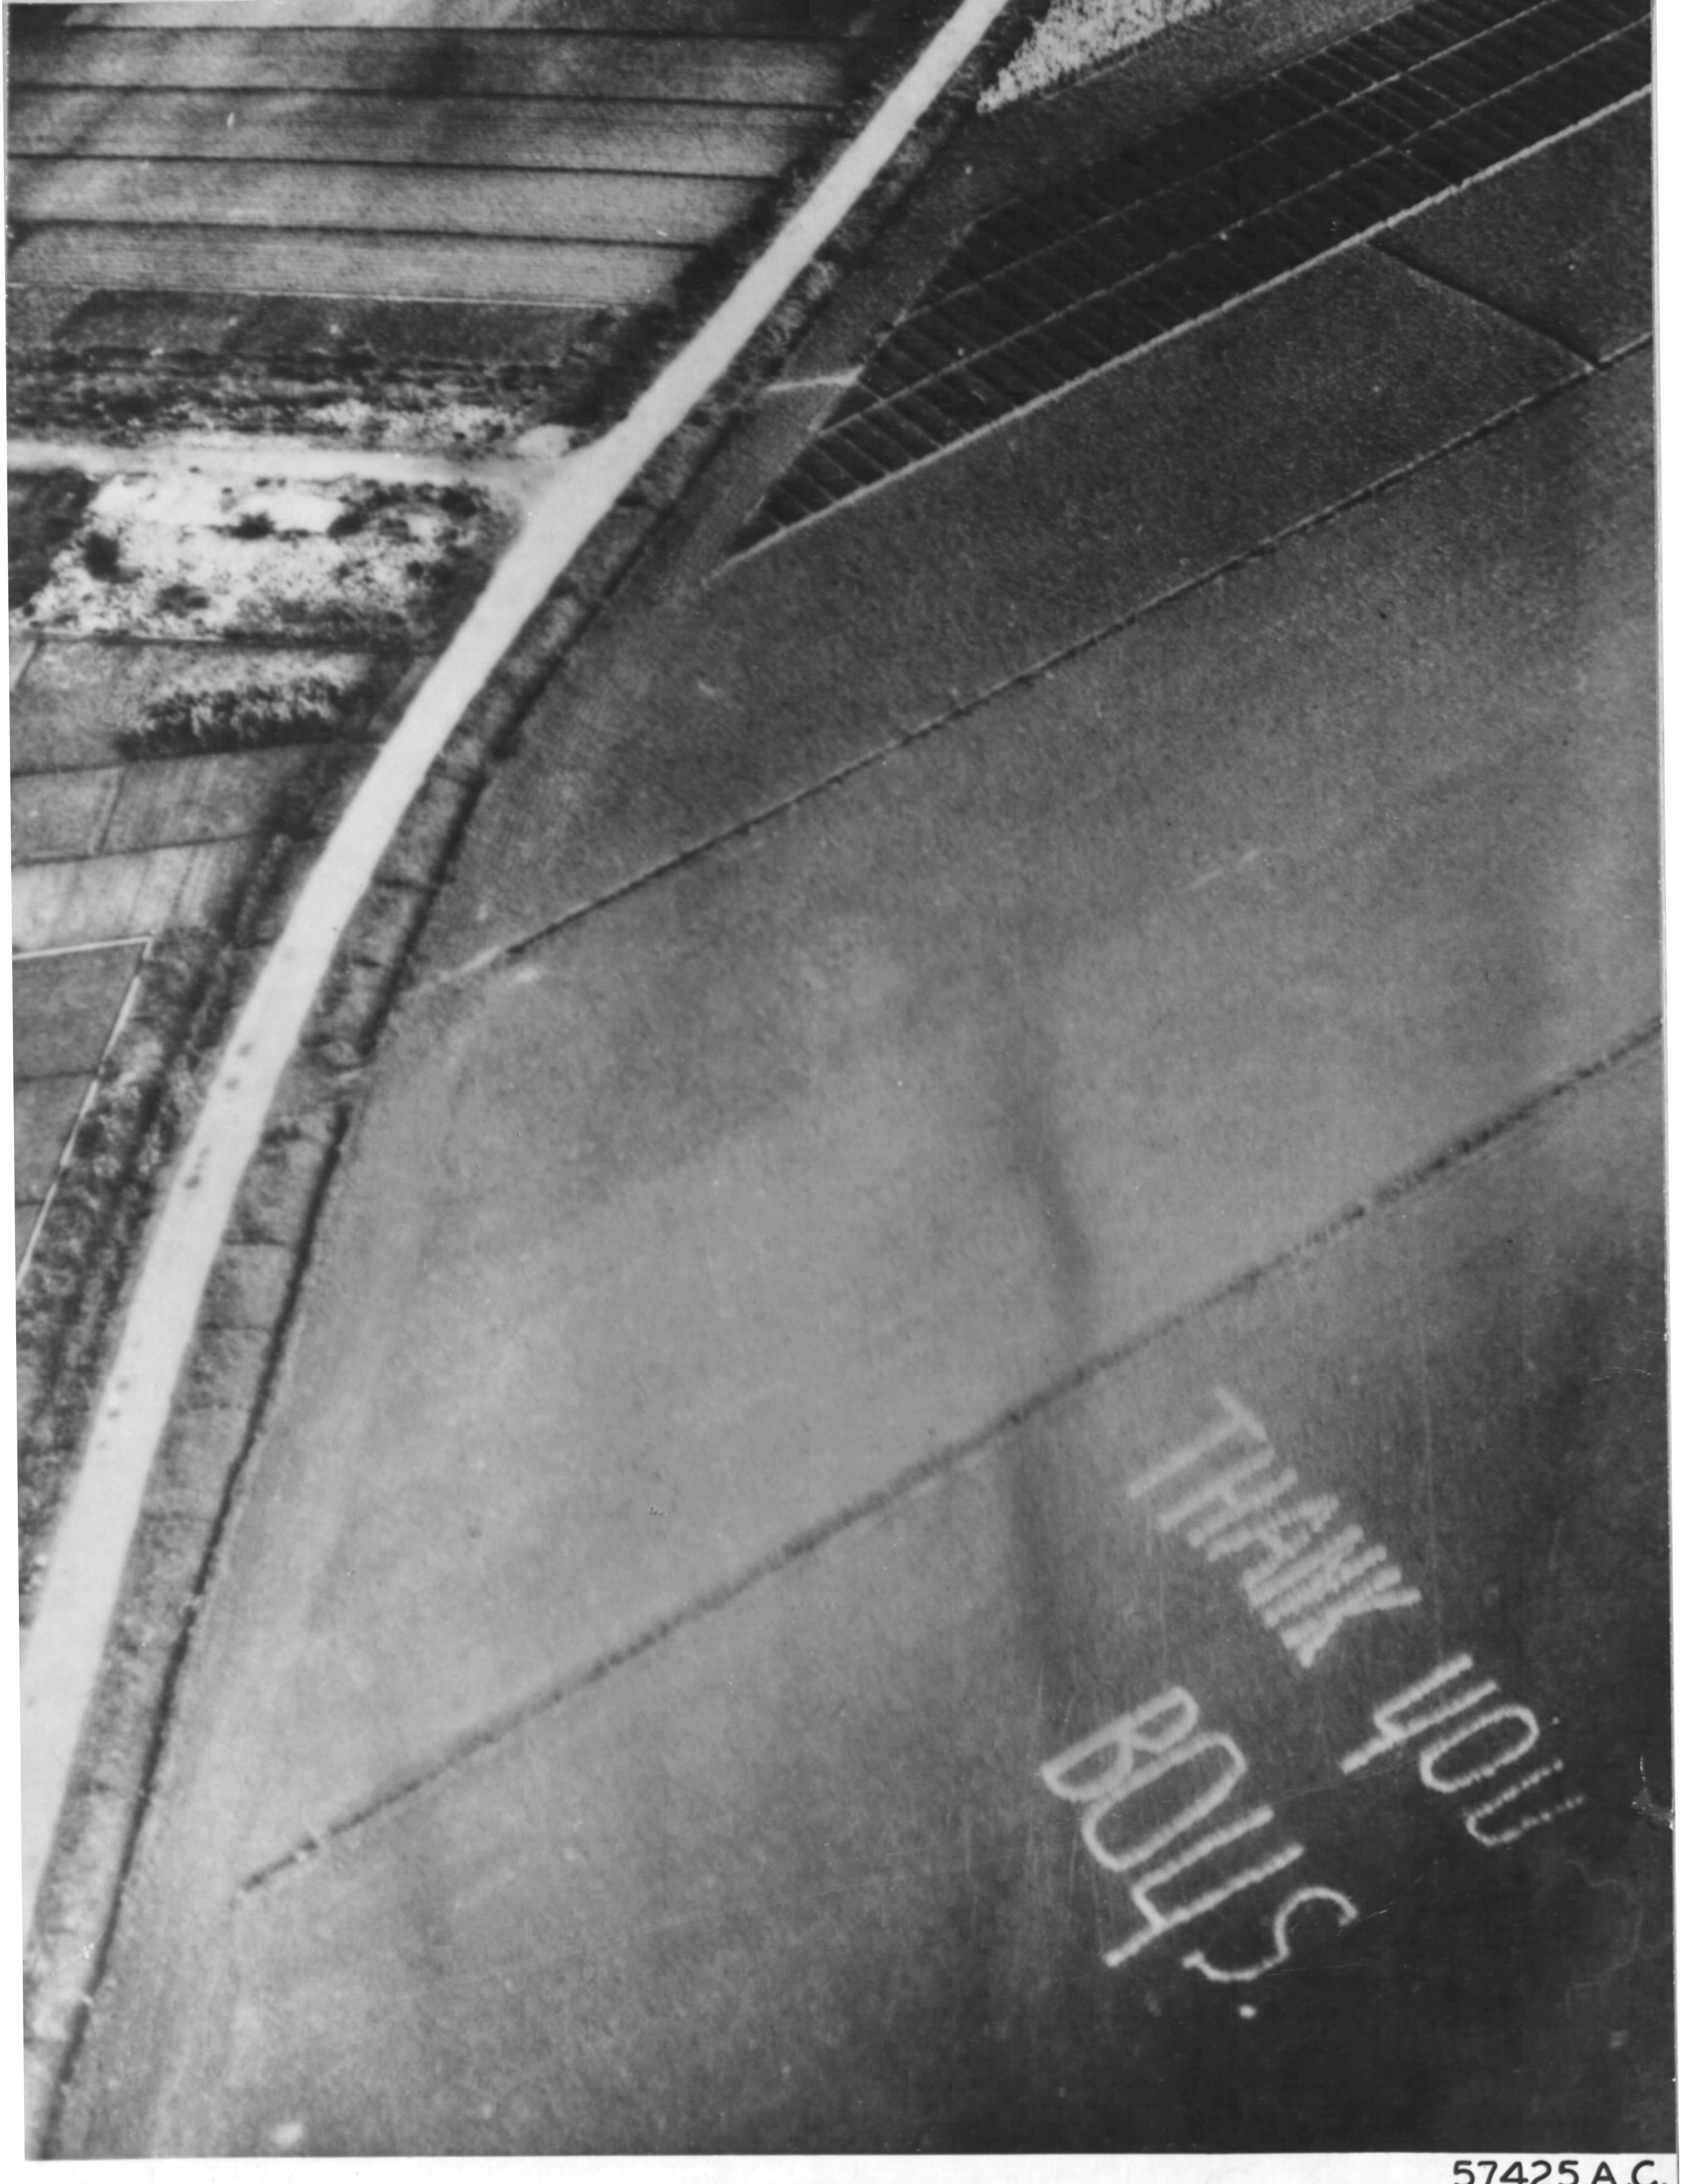 A message from the starving people of Holland to the US Air Force for food drops during Operation Chowhound, early May 1945. The RAF ran Operation Manna that dropped even more food to the starving Dutch. Page 1 of 2.